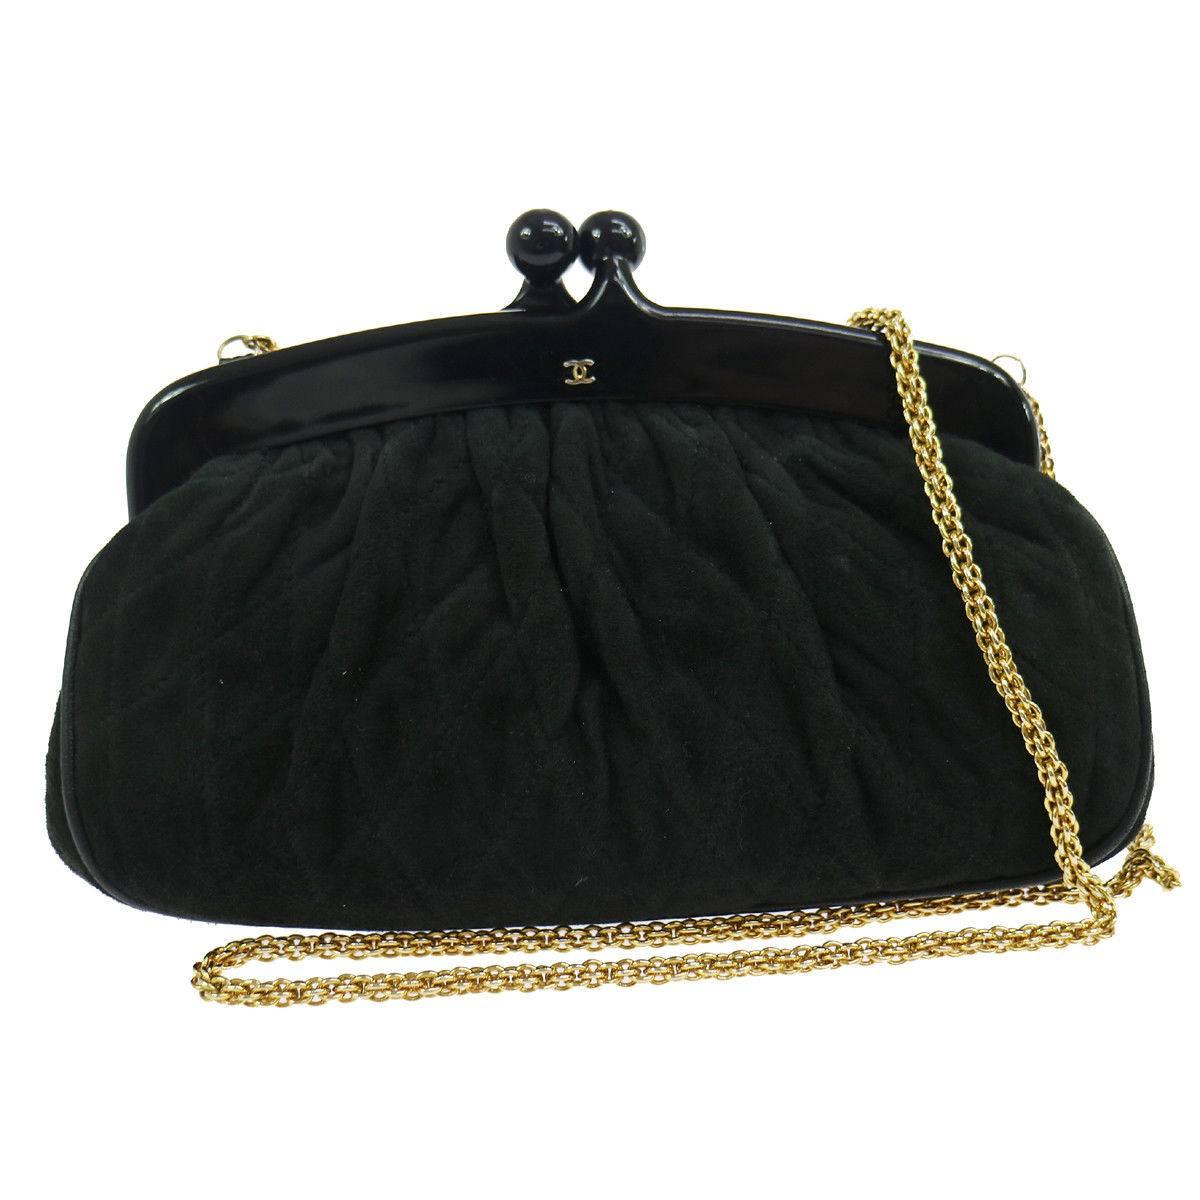 Chanel Black Suede KissLock Party 2 in 1 Clutch Evening Shoulder Bag in Box